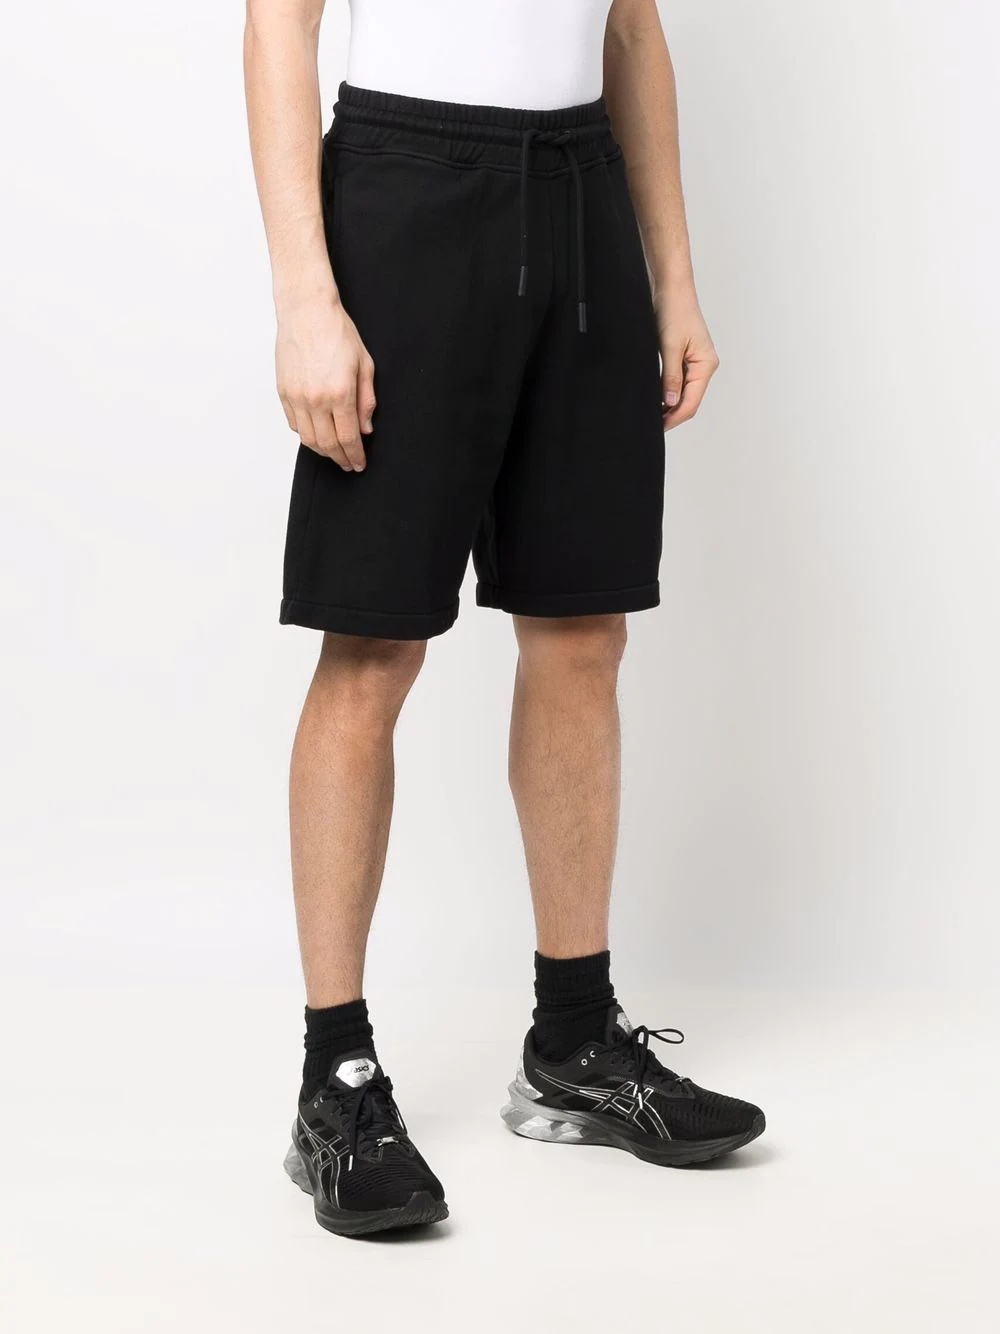 embroidered-motif track shorts - 3